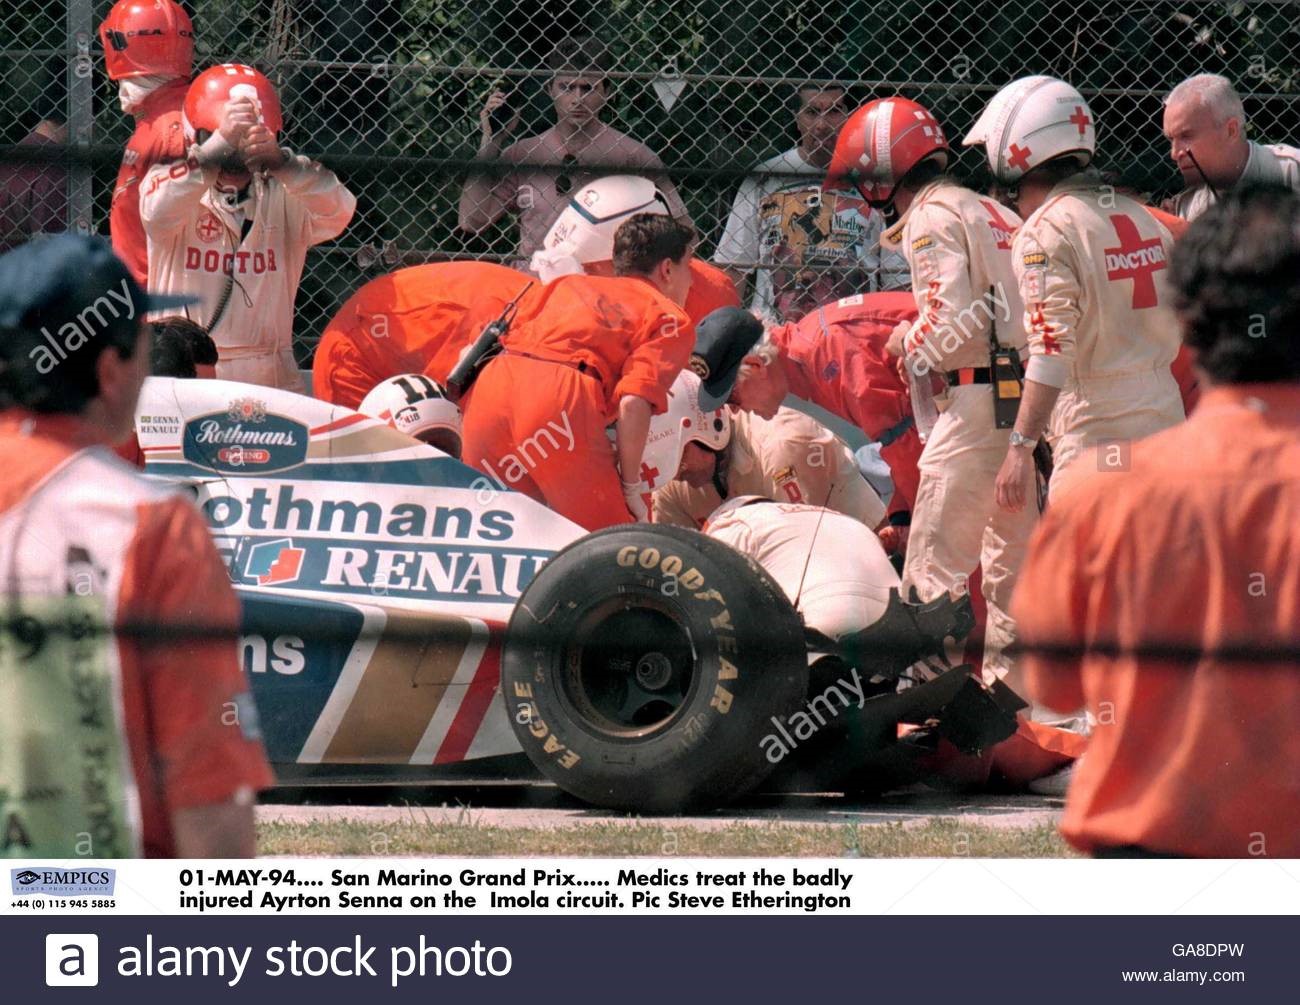 Ayrton Senna's Williams after the fatal accident at Imola.